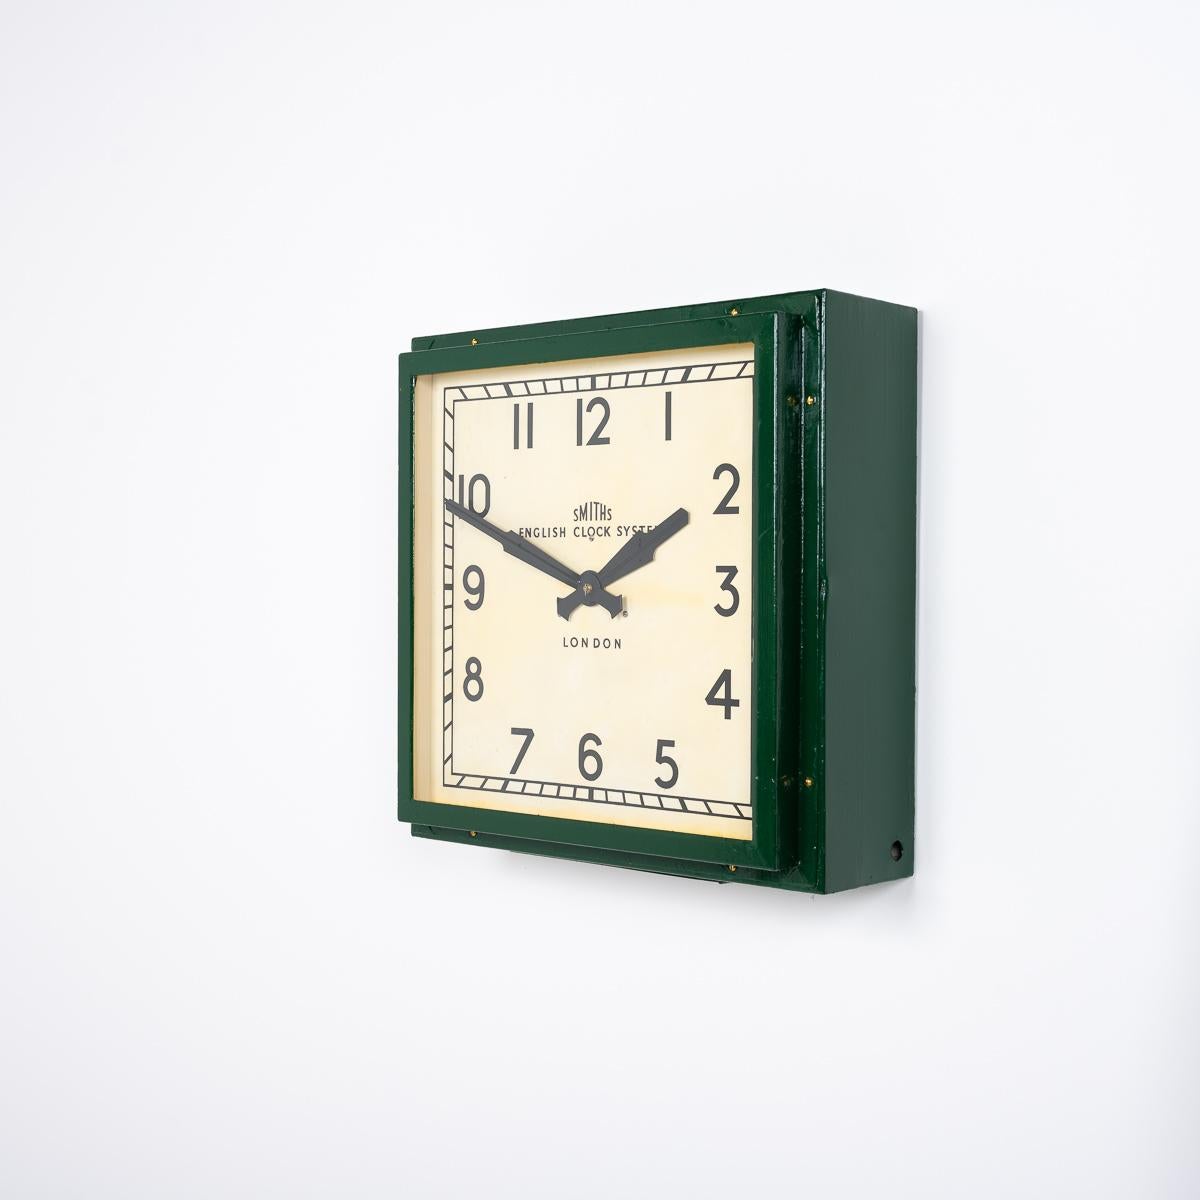 Steel Large Antique Square Factory Wall Clock by Smiths English Clock Systems